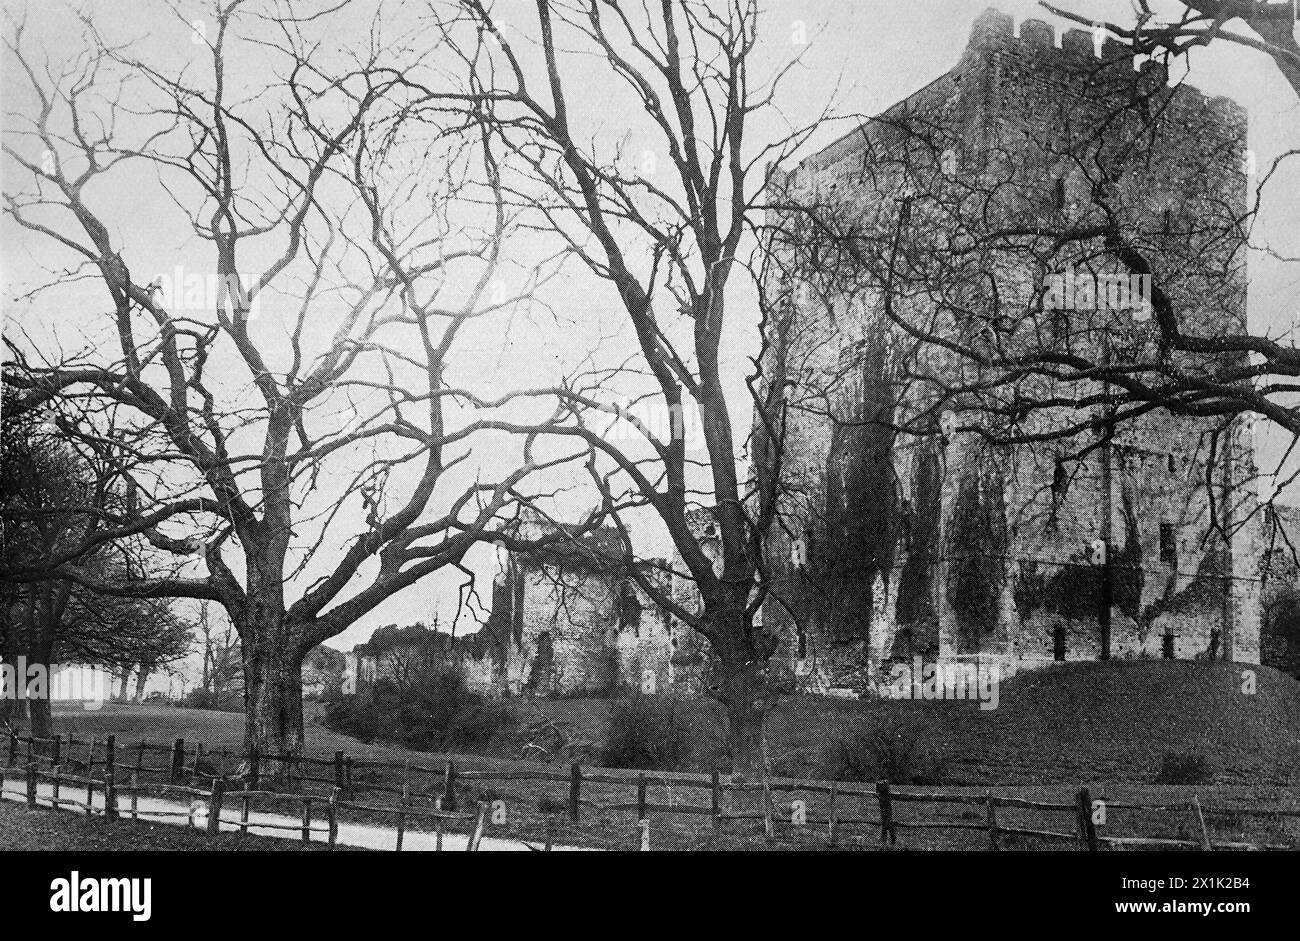 A view of Porchester Castle, near Portsmouth, original photograph by S. Cribb of Southsea. Originally printed and published for the Portsmouth and Southsea Improvement Association, c1924. Stock Photo